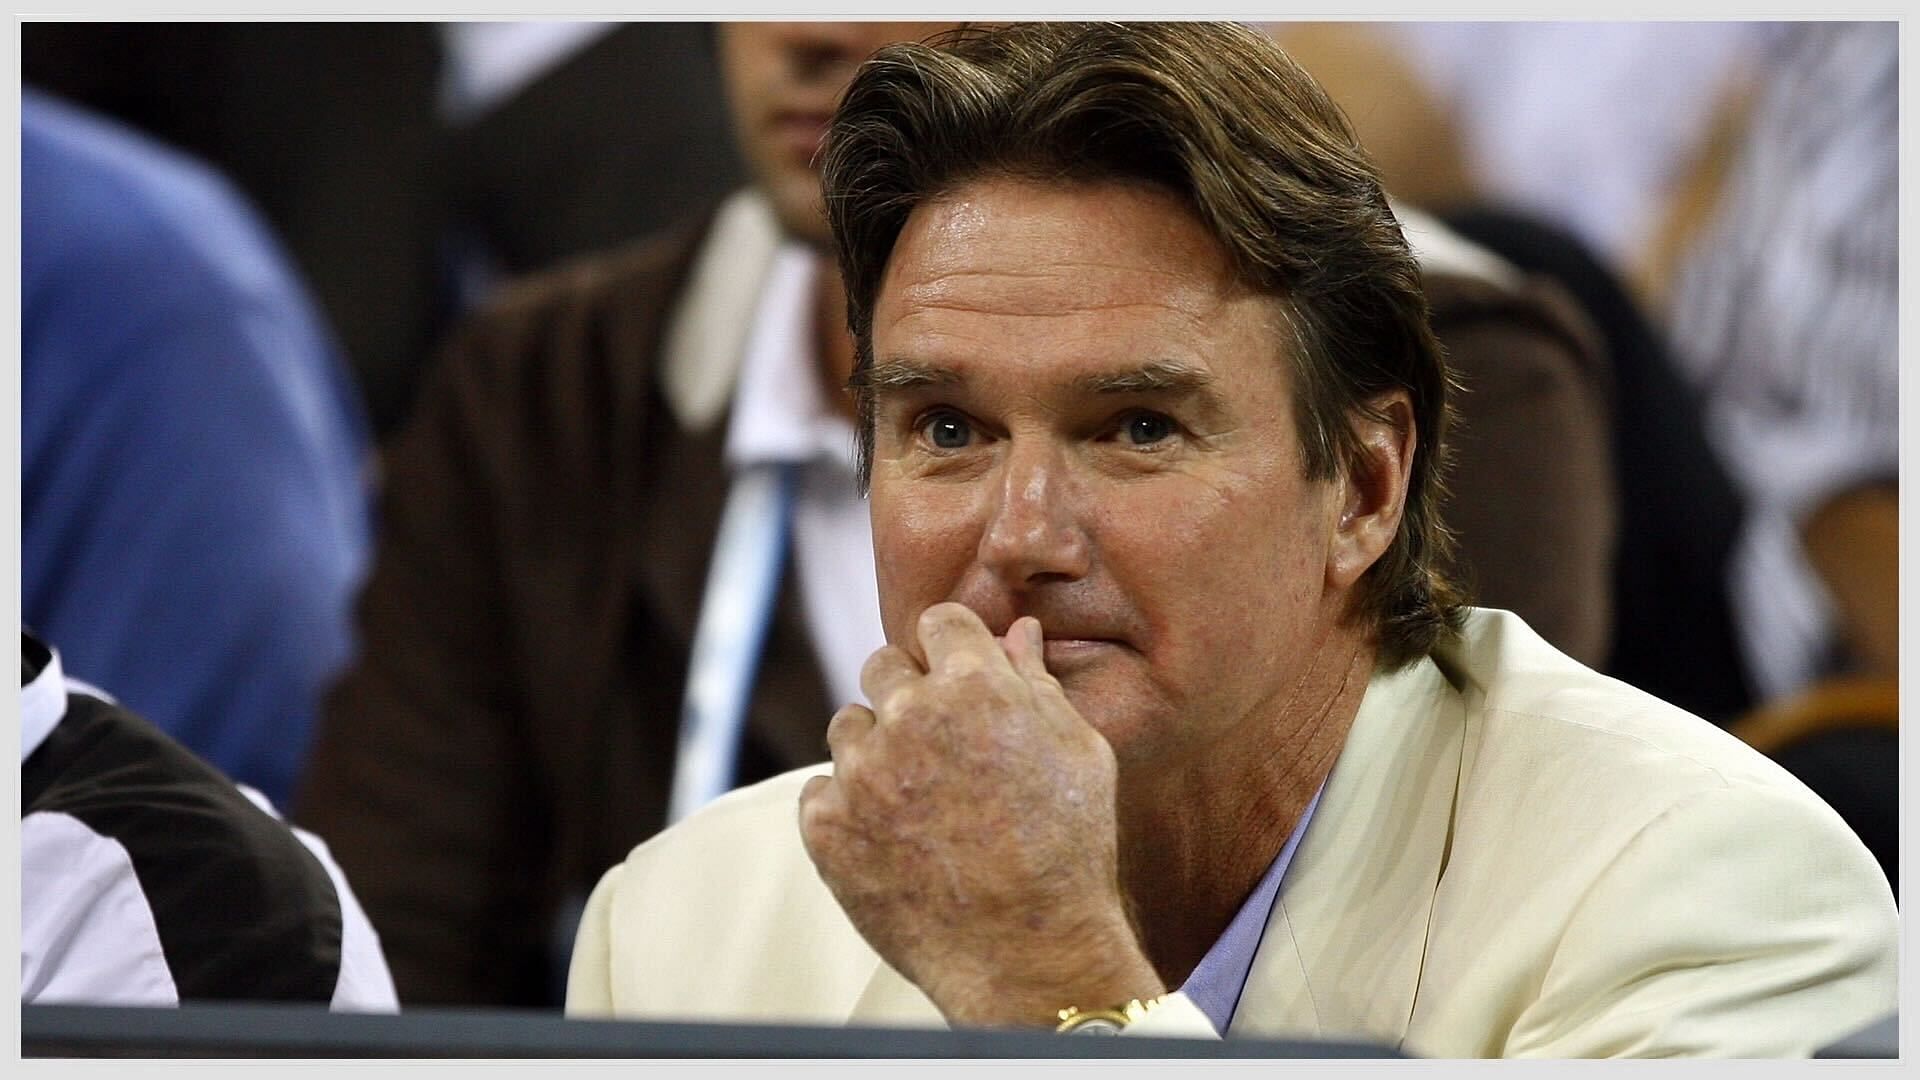 Jimmy Connors is a former World No. 1